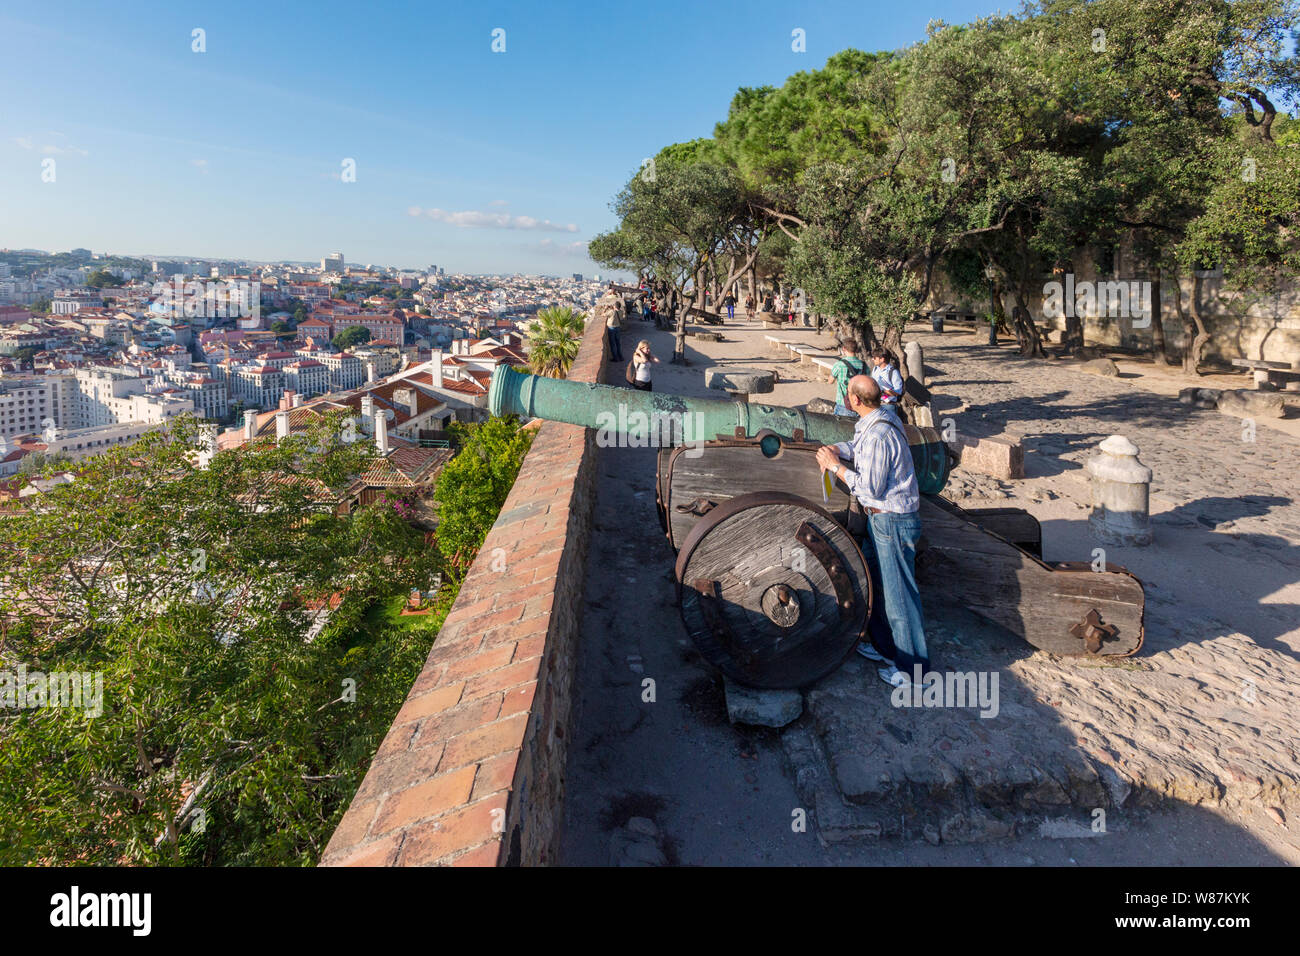 View over Lisbon, Portugal from Castelo do Sao Jorge or St George’s Castle. Stock Photo